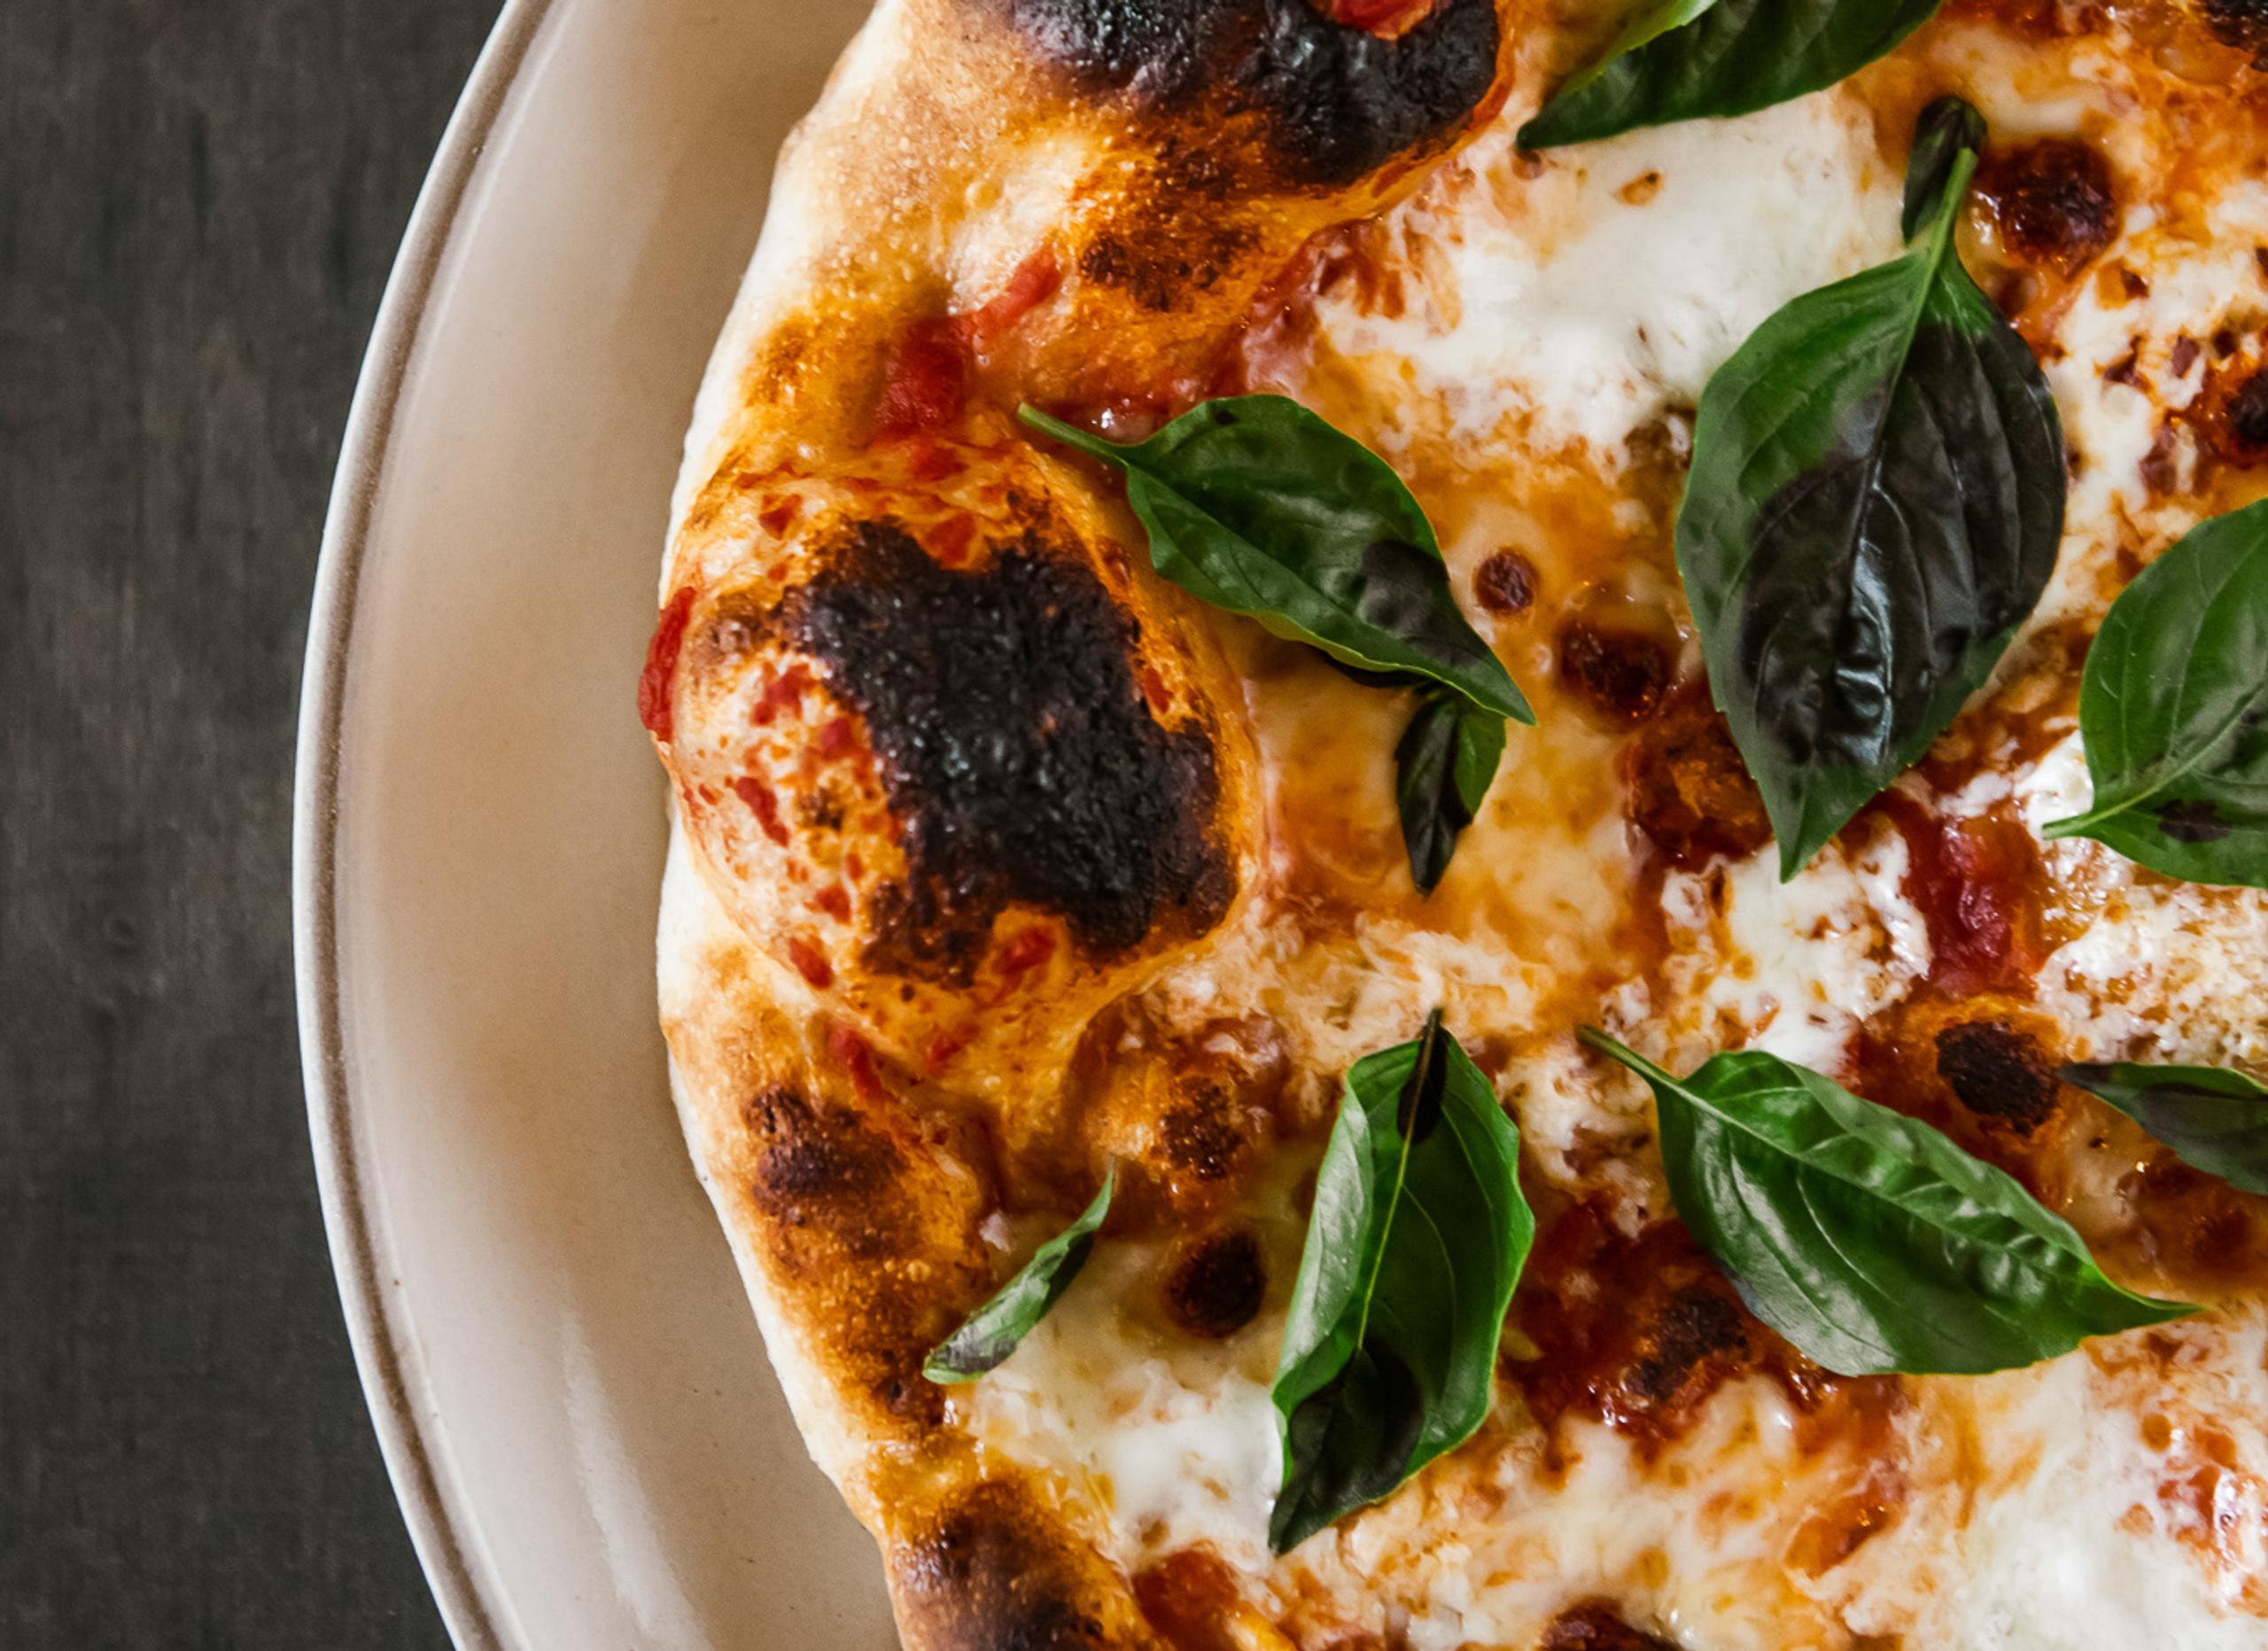 Closeup view of margherita pizza with whole basil leaves on top